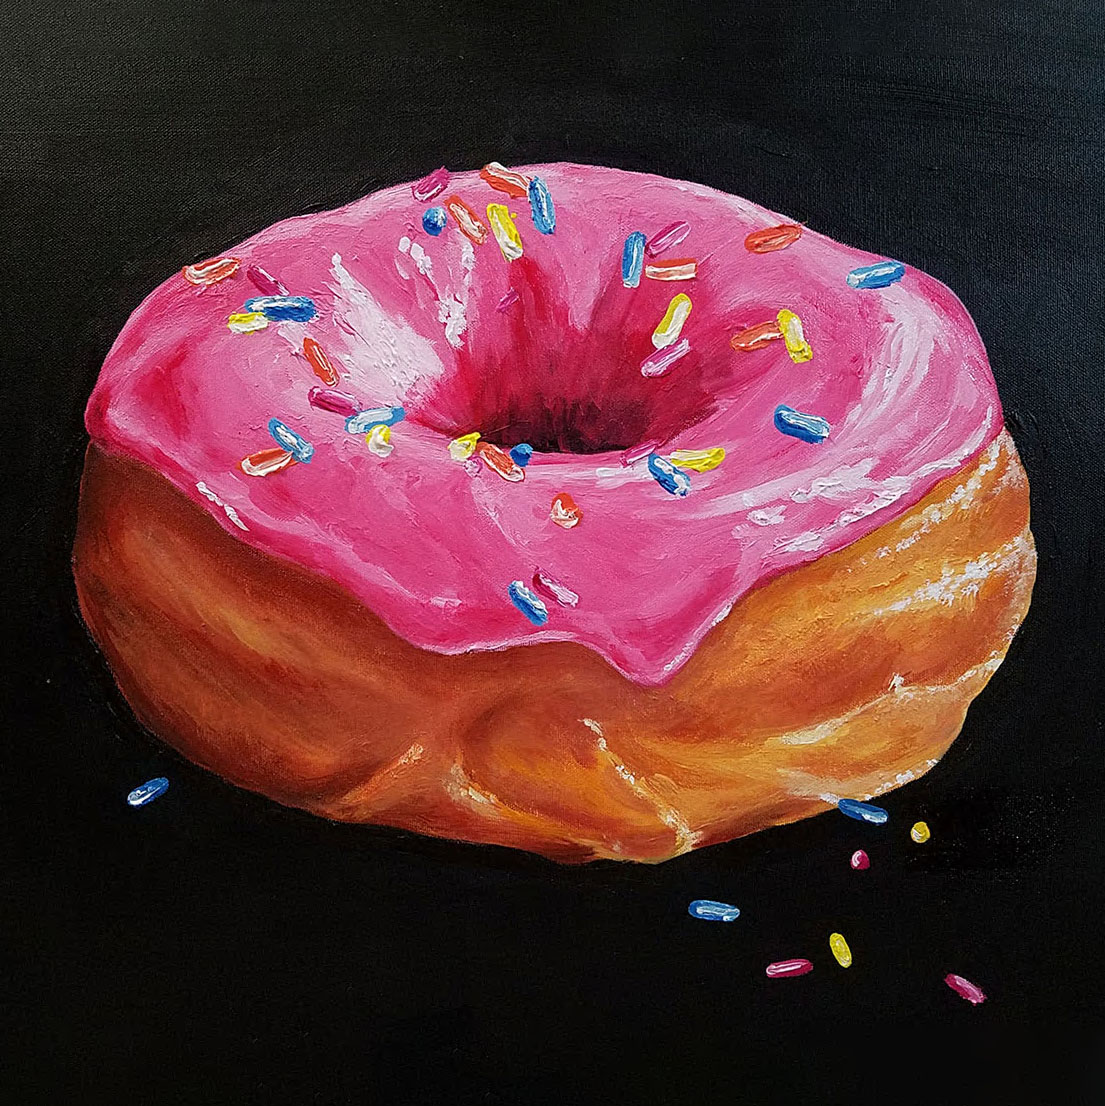 acrylic painting of a donut with pink frosting and sprinkles on a black background